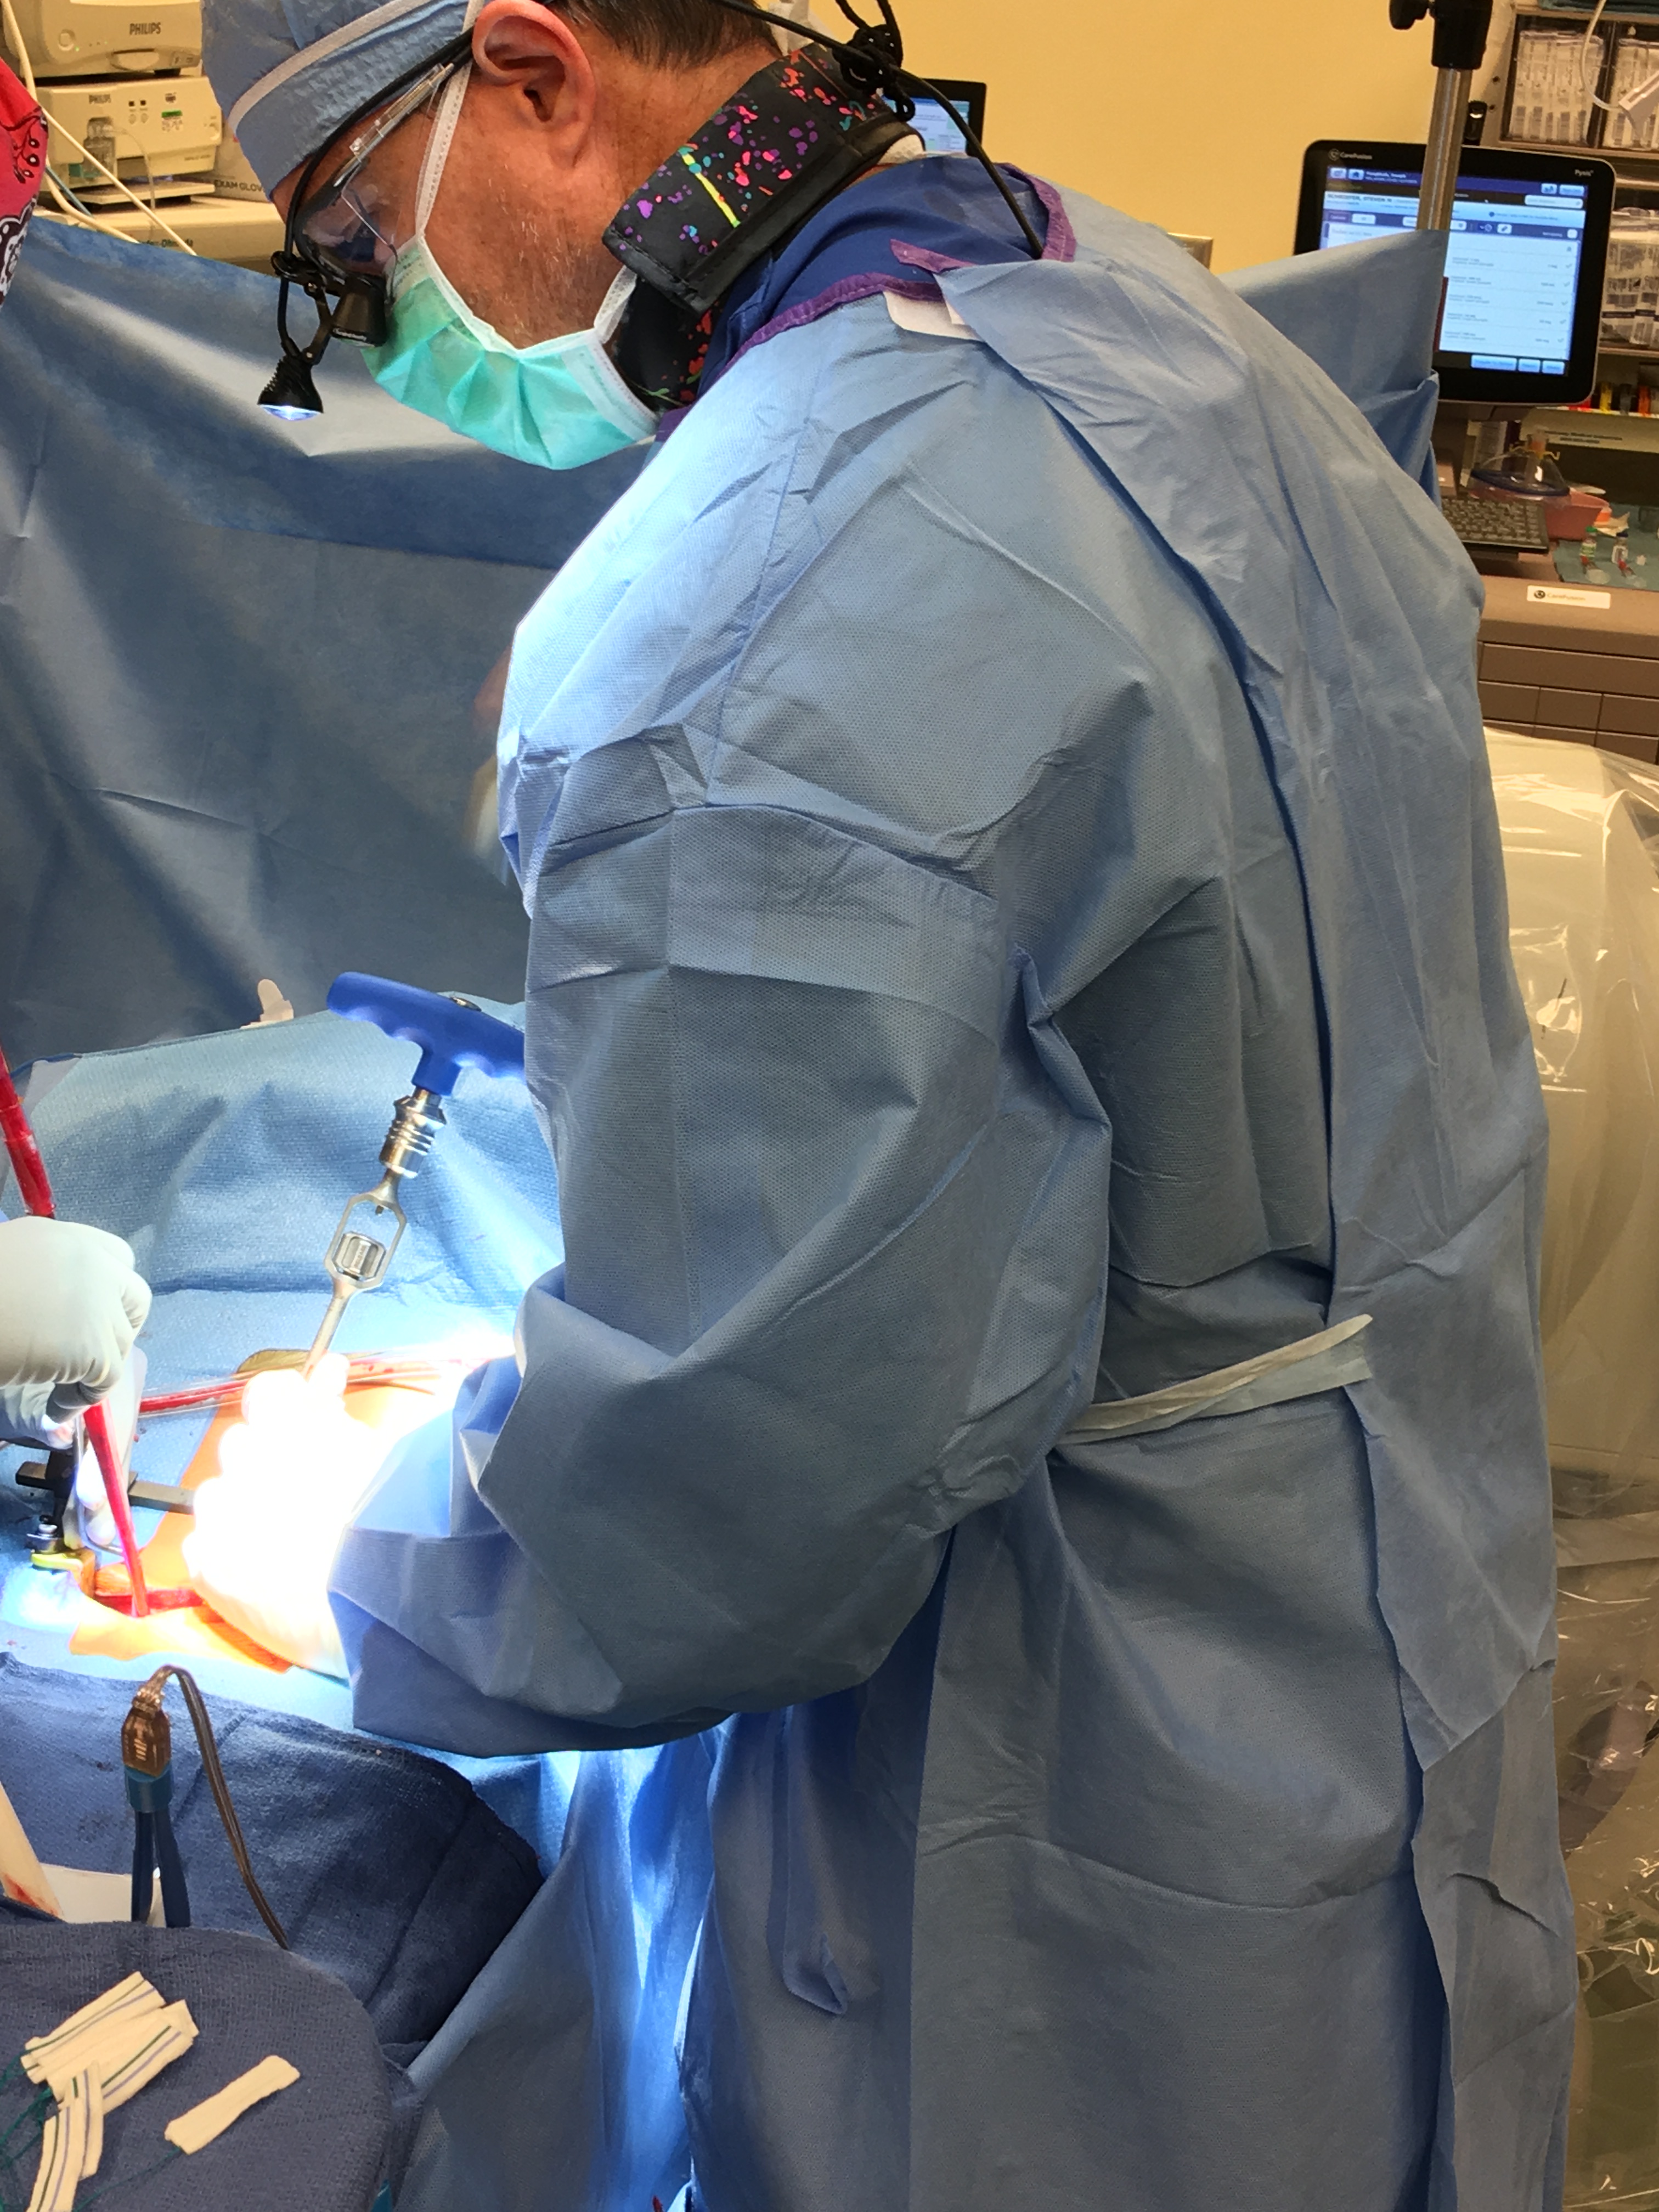 Dr. McFarland Performing a Less Exposure Surgical (LES) Procedure.